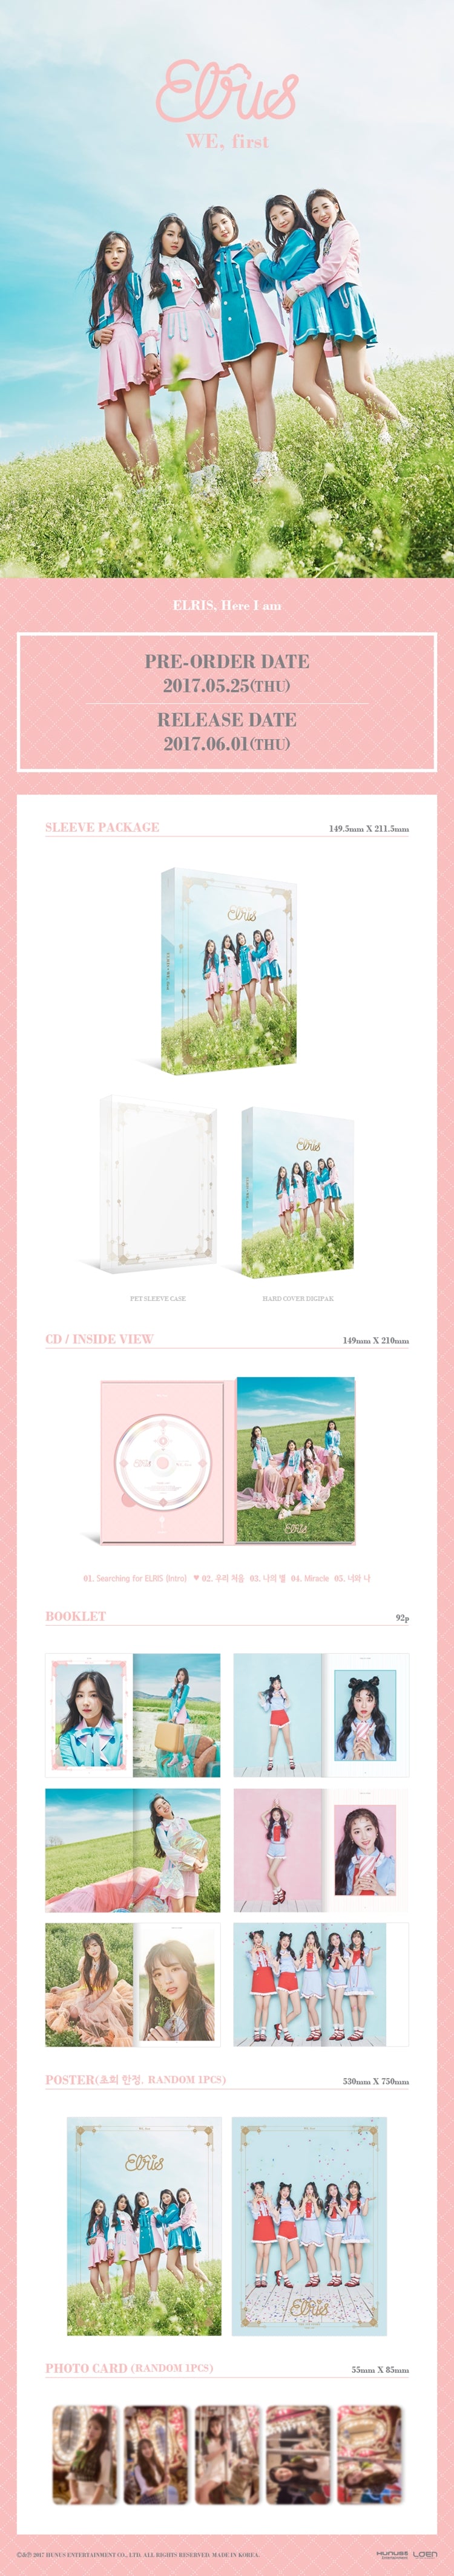 1 CD
1 Photo Book (92 pages)
1 Photo Card